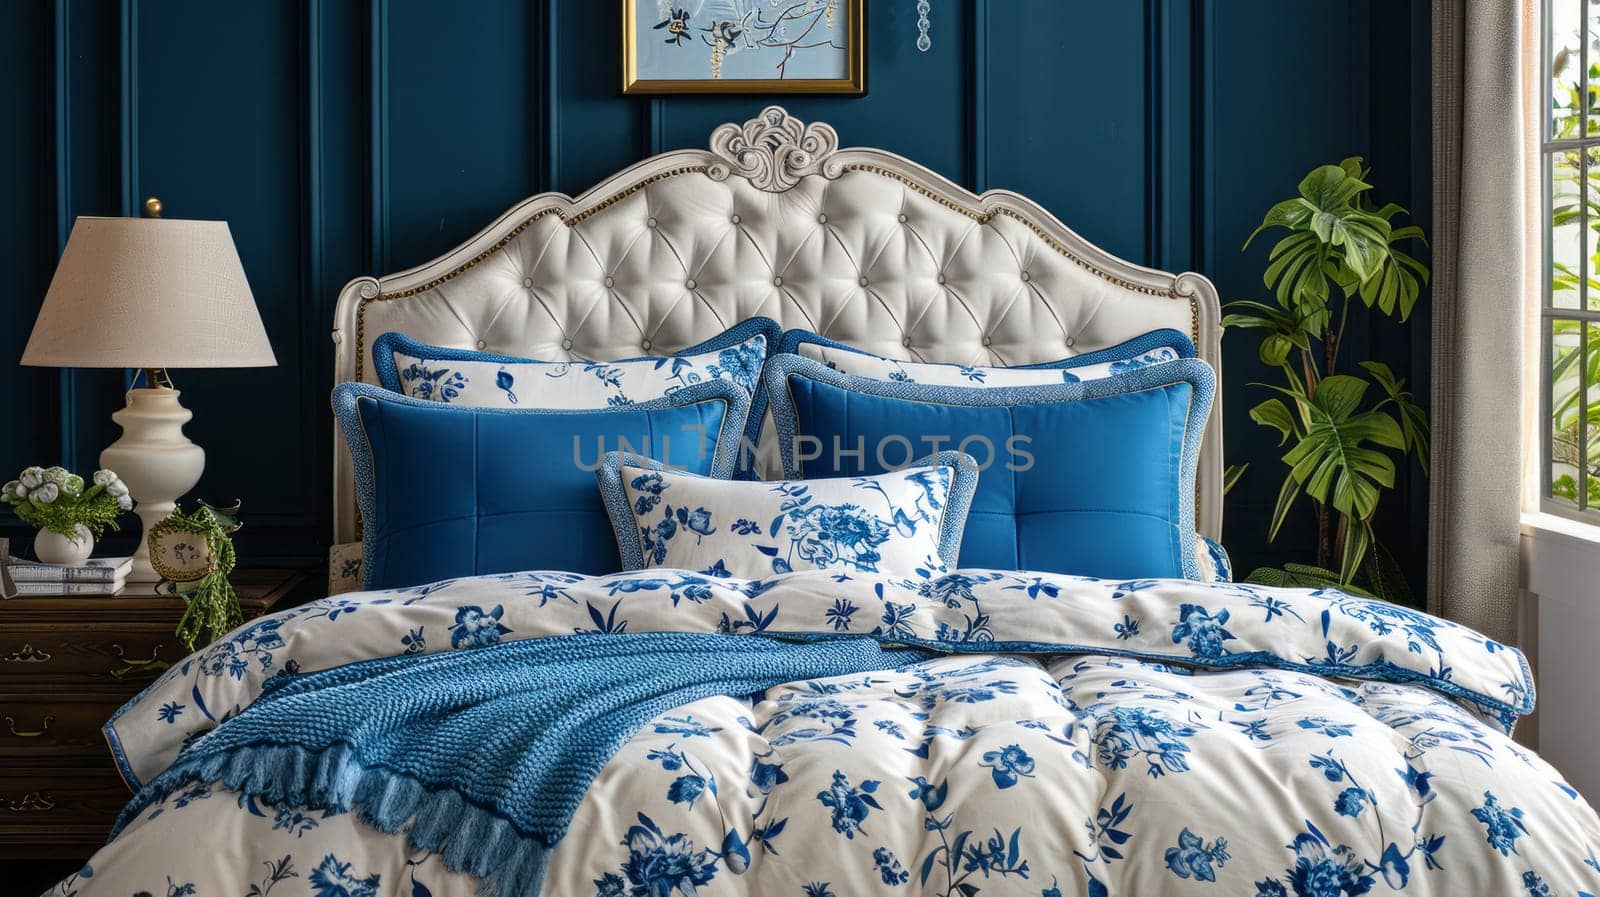 Bed with blue and white pillows and bedspreads. Interior design of a modern bedroom by NataliPopova